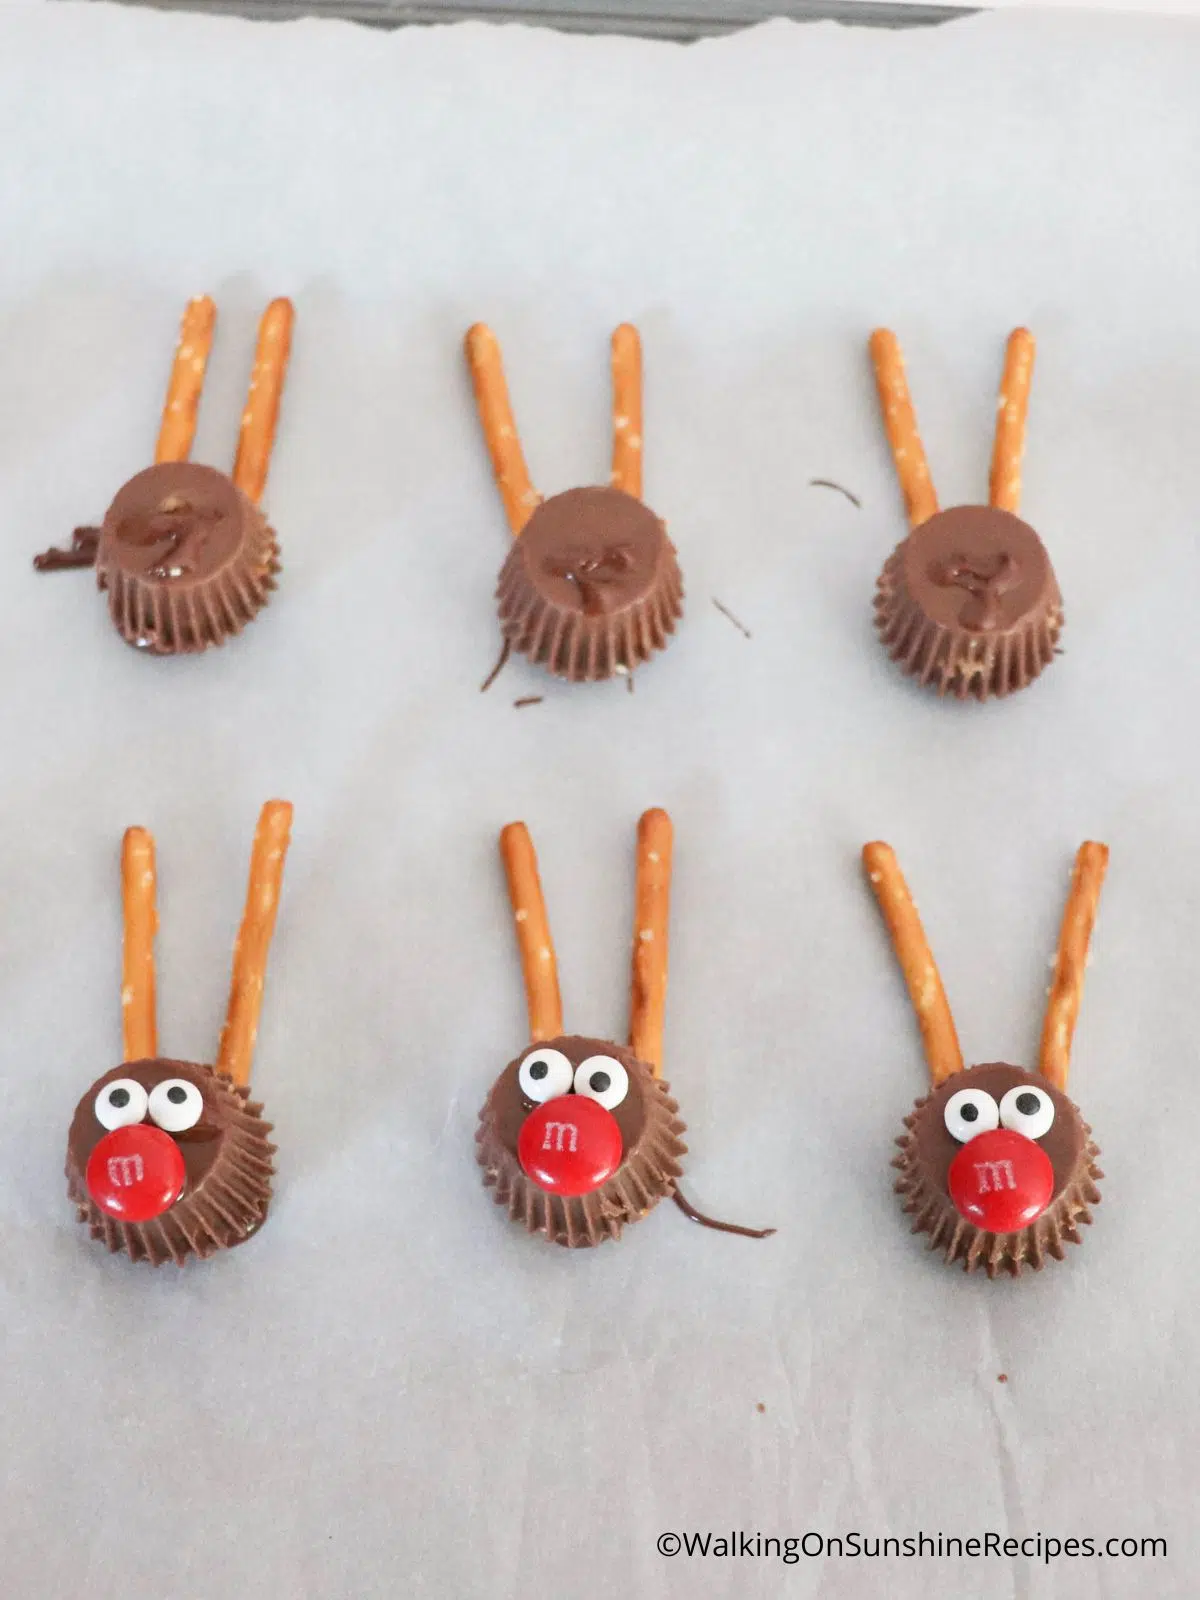 Candy eyes and candy nose on mini peanut butter cups.